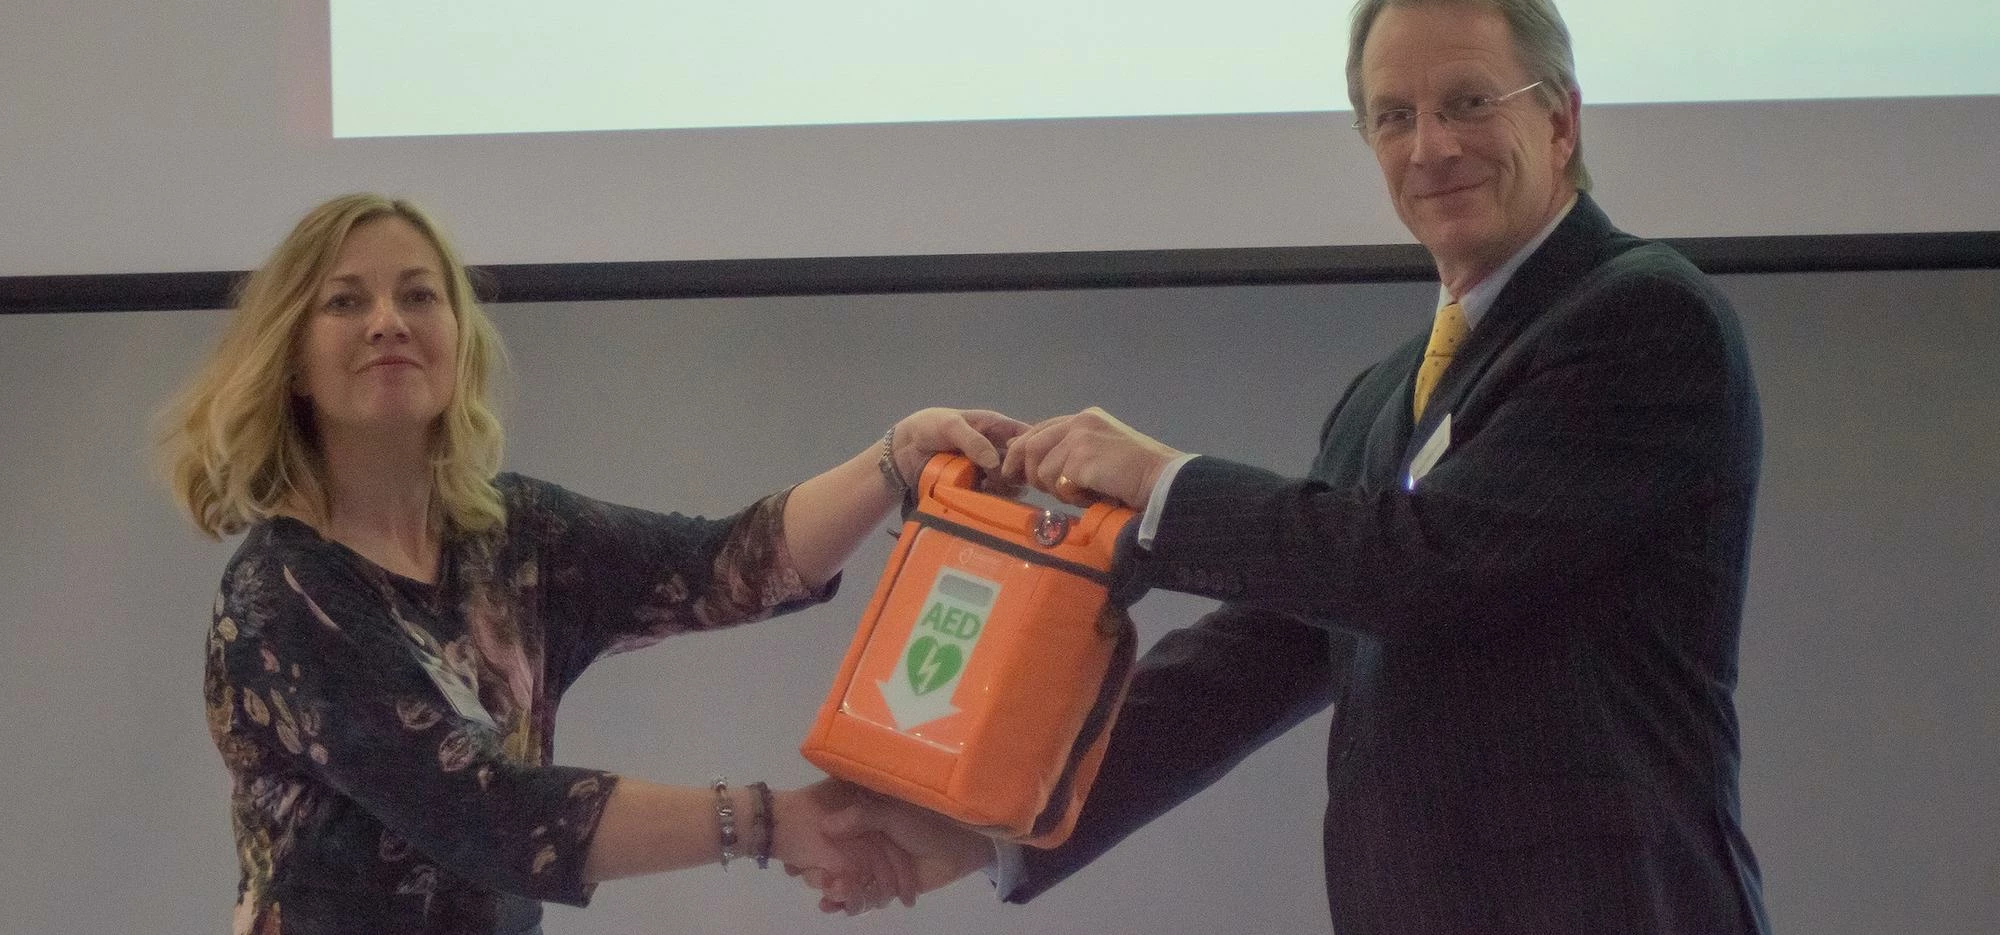 Carole Conroy, Senior Lecturer in Health and Safety, University of Salford receives the defib from C